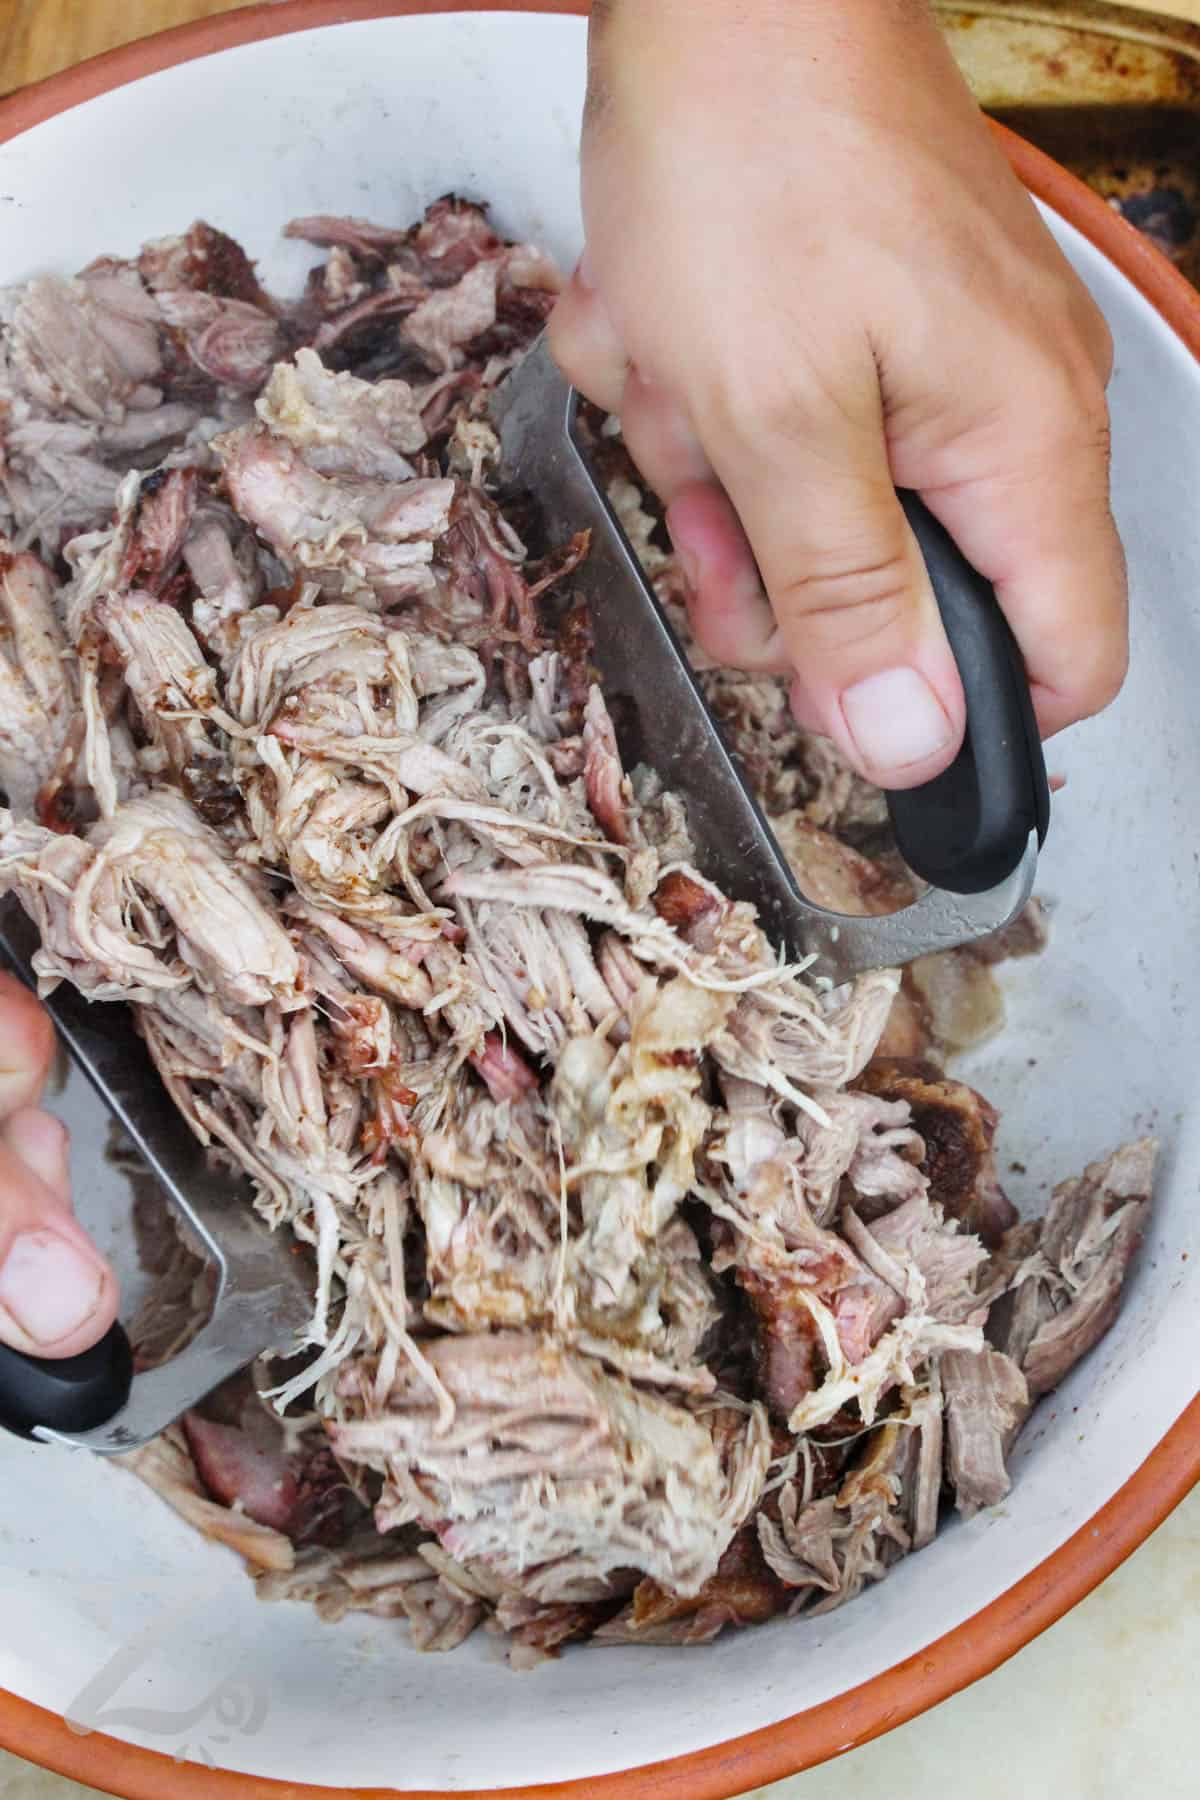 shredding Smoked Pulled Pork in a bowl